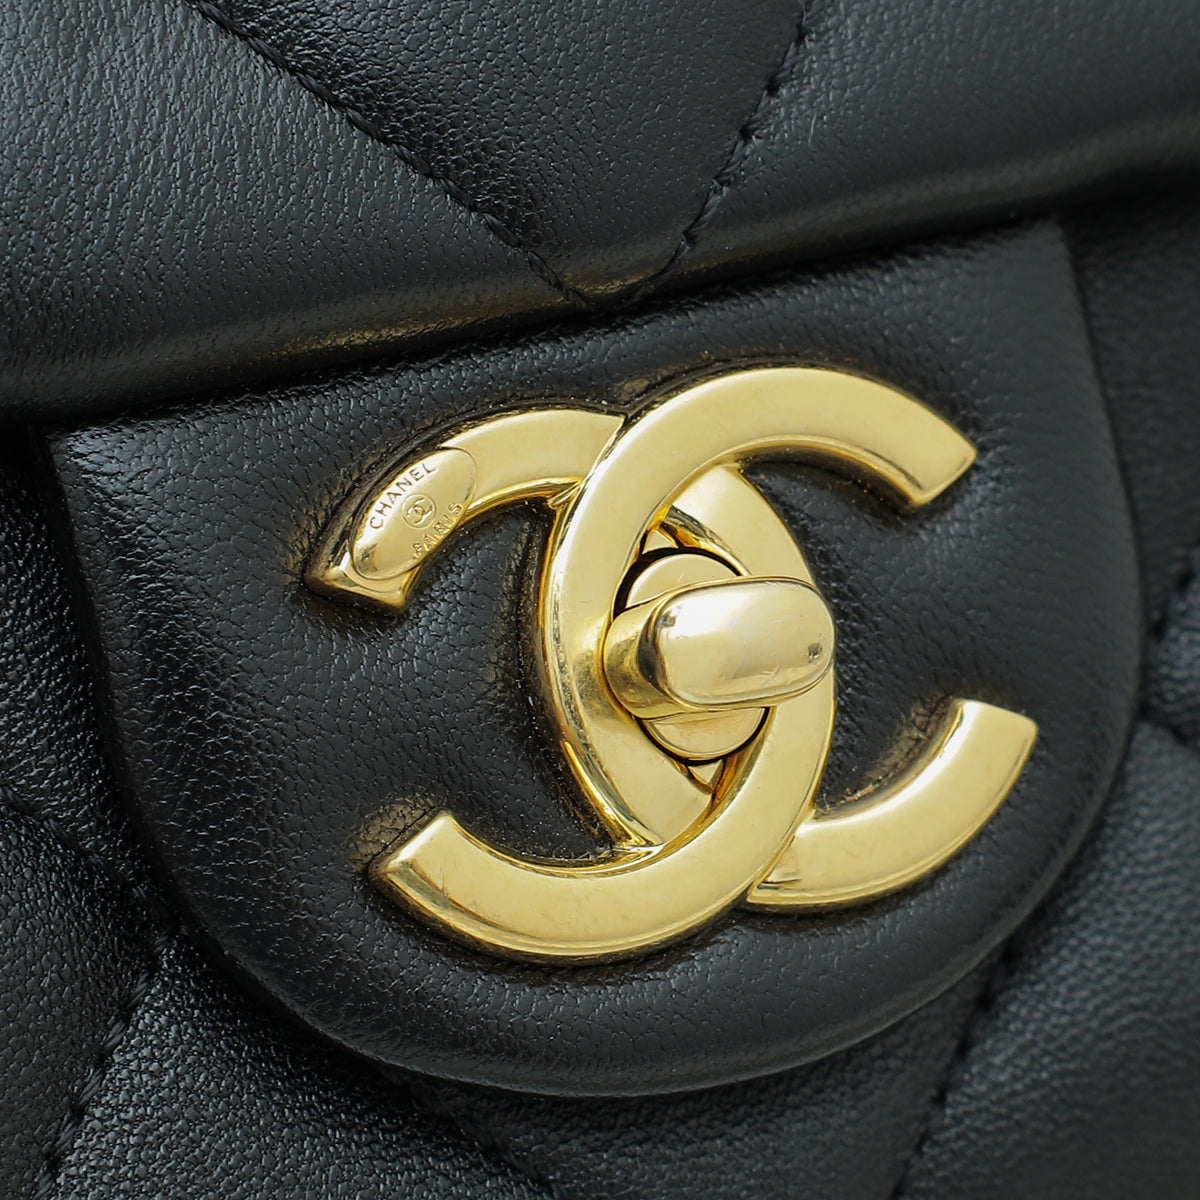 Chanel Black Funky Town Large Flap Bag